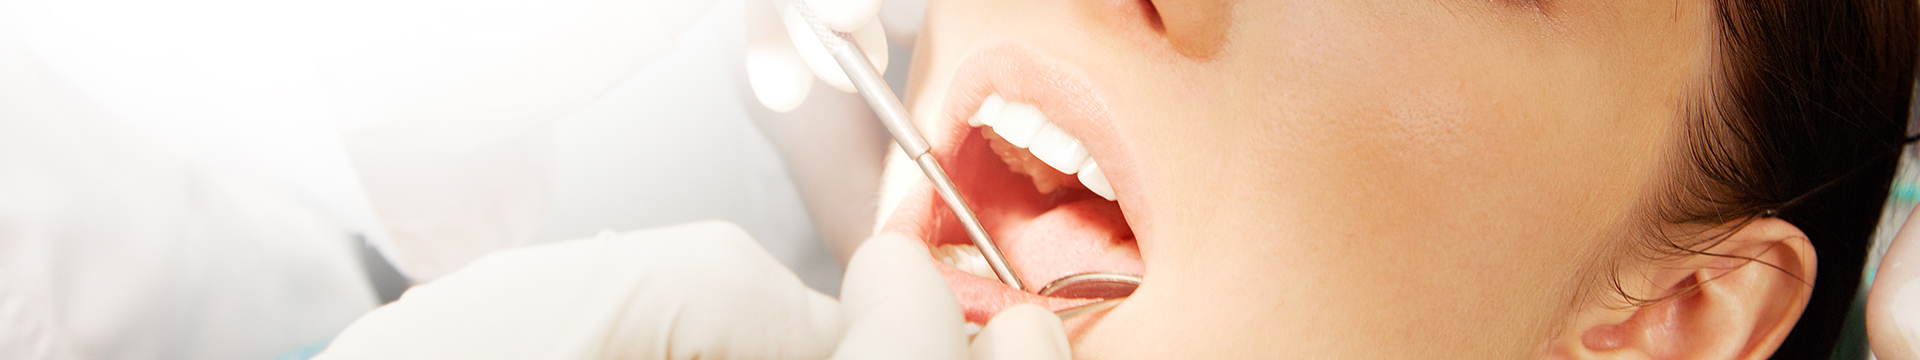 Close-up of womans mouth being examined in dental chair